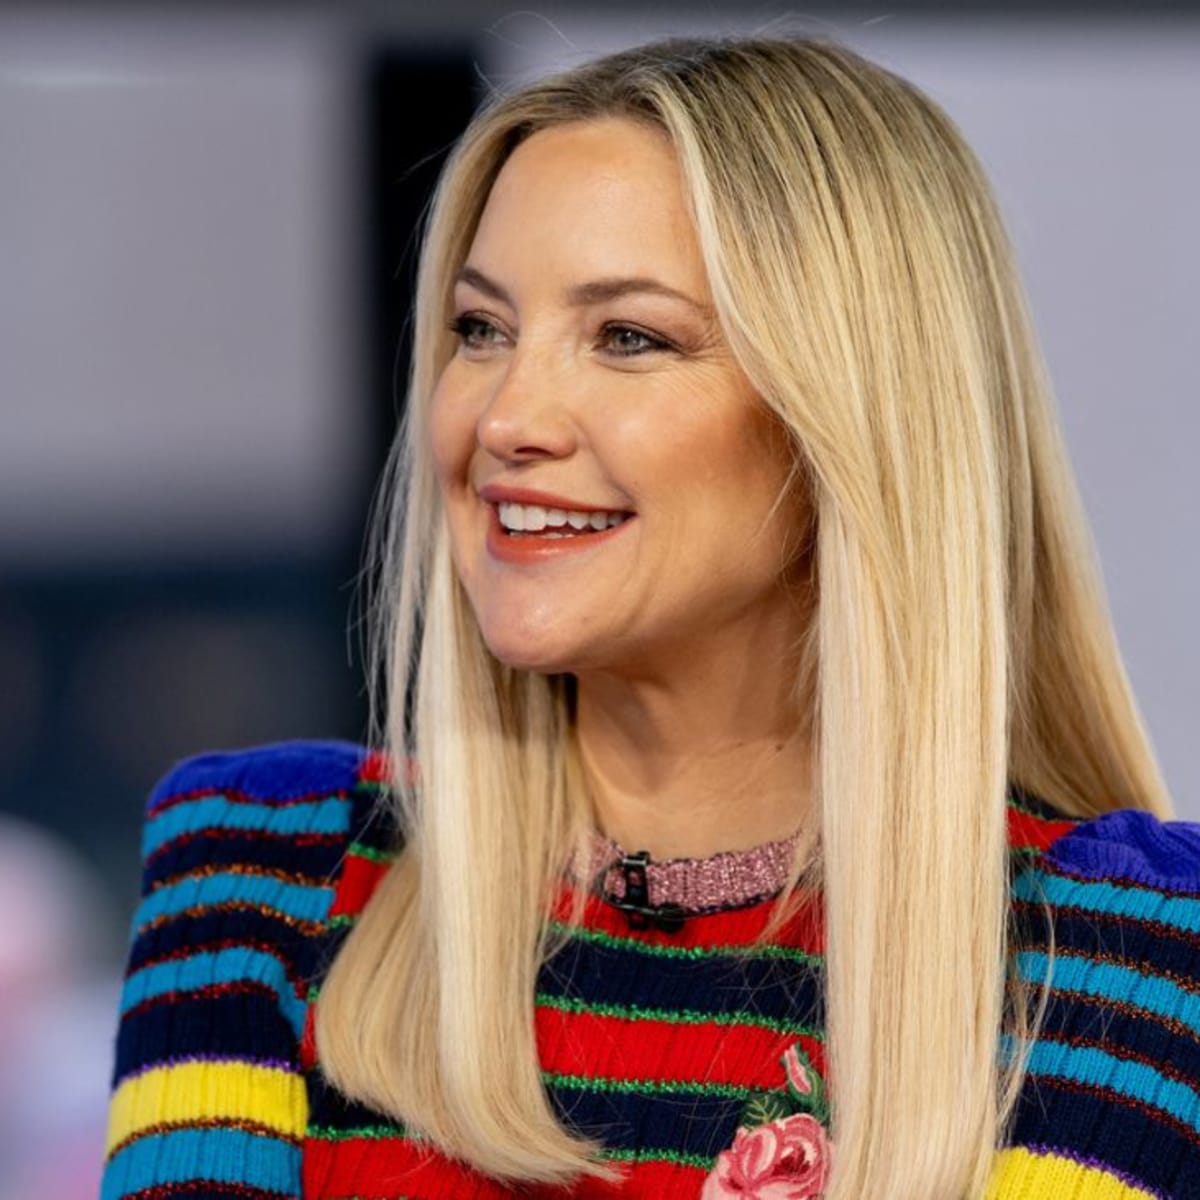 Kate Hudson pivots from acting to a new career in music with debut single